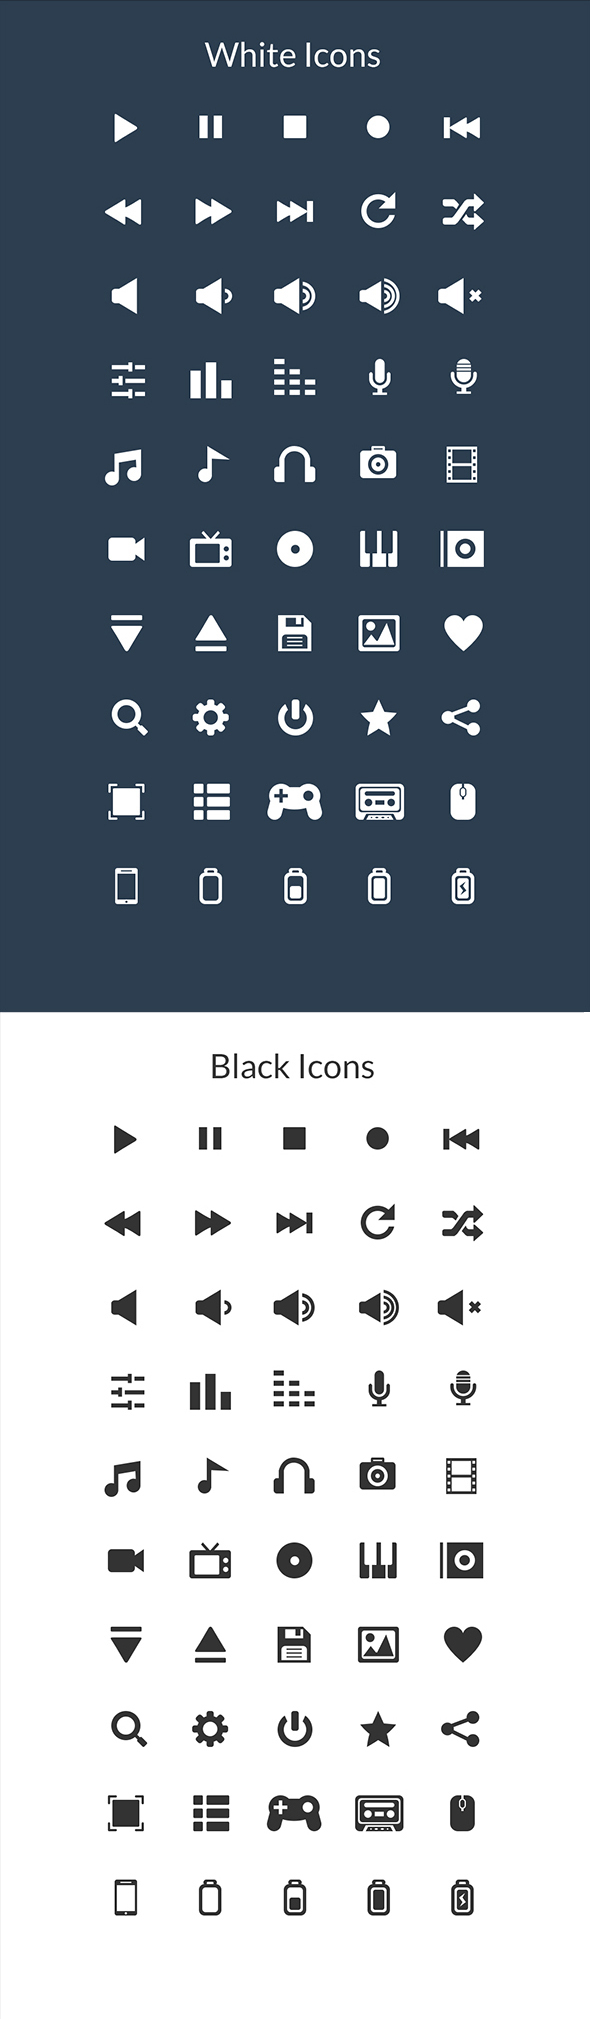 button fat clean Icon long shadow flat multiple color White black bw Multimedia  mp3 flv images song